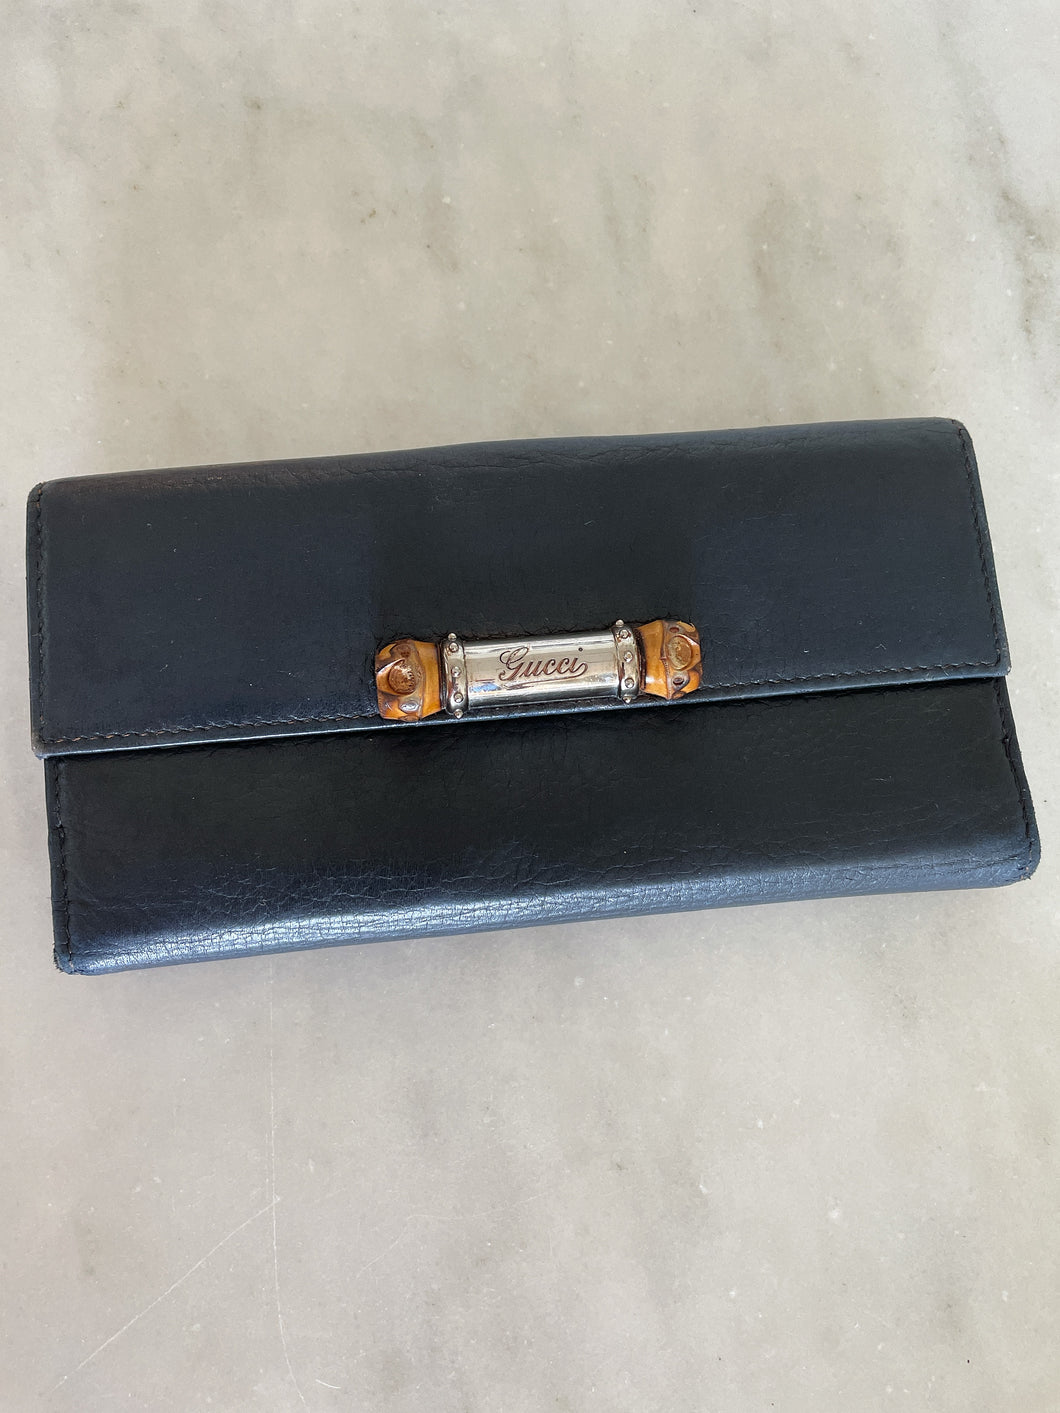 Gucci Wallet - preowned